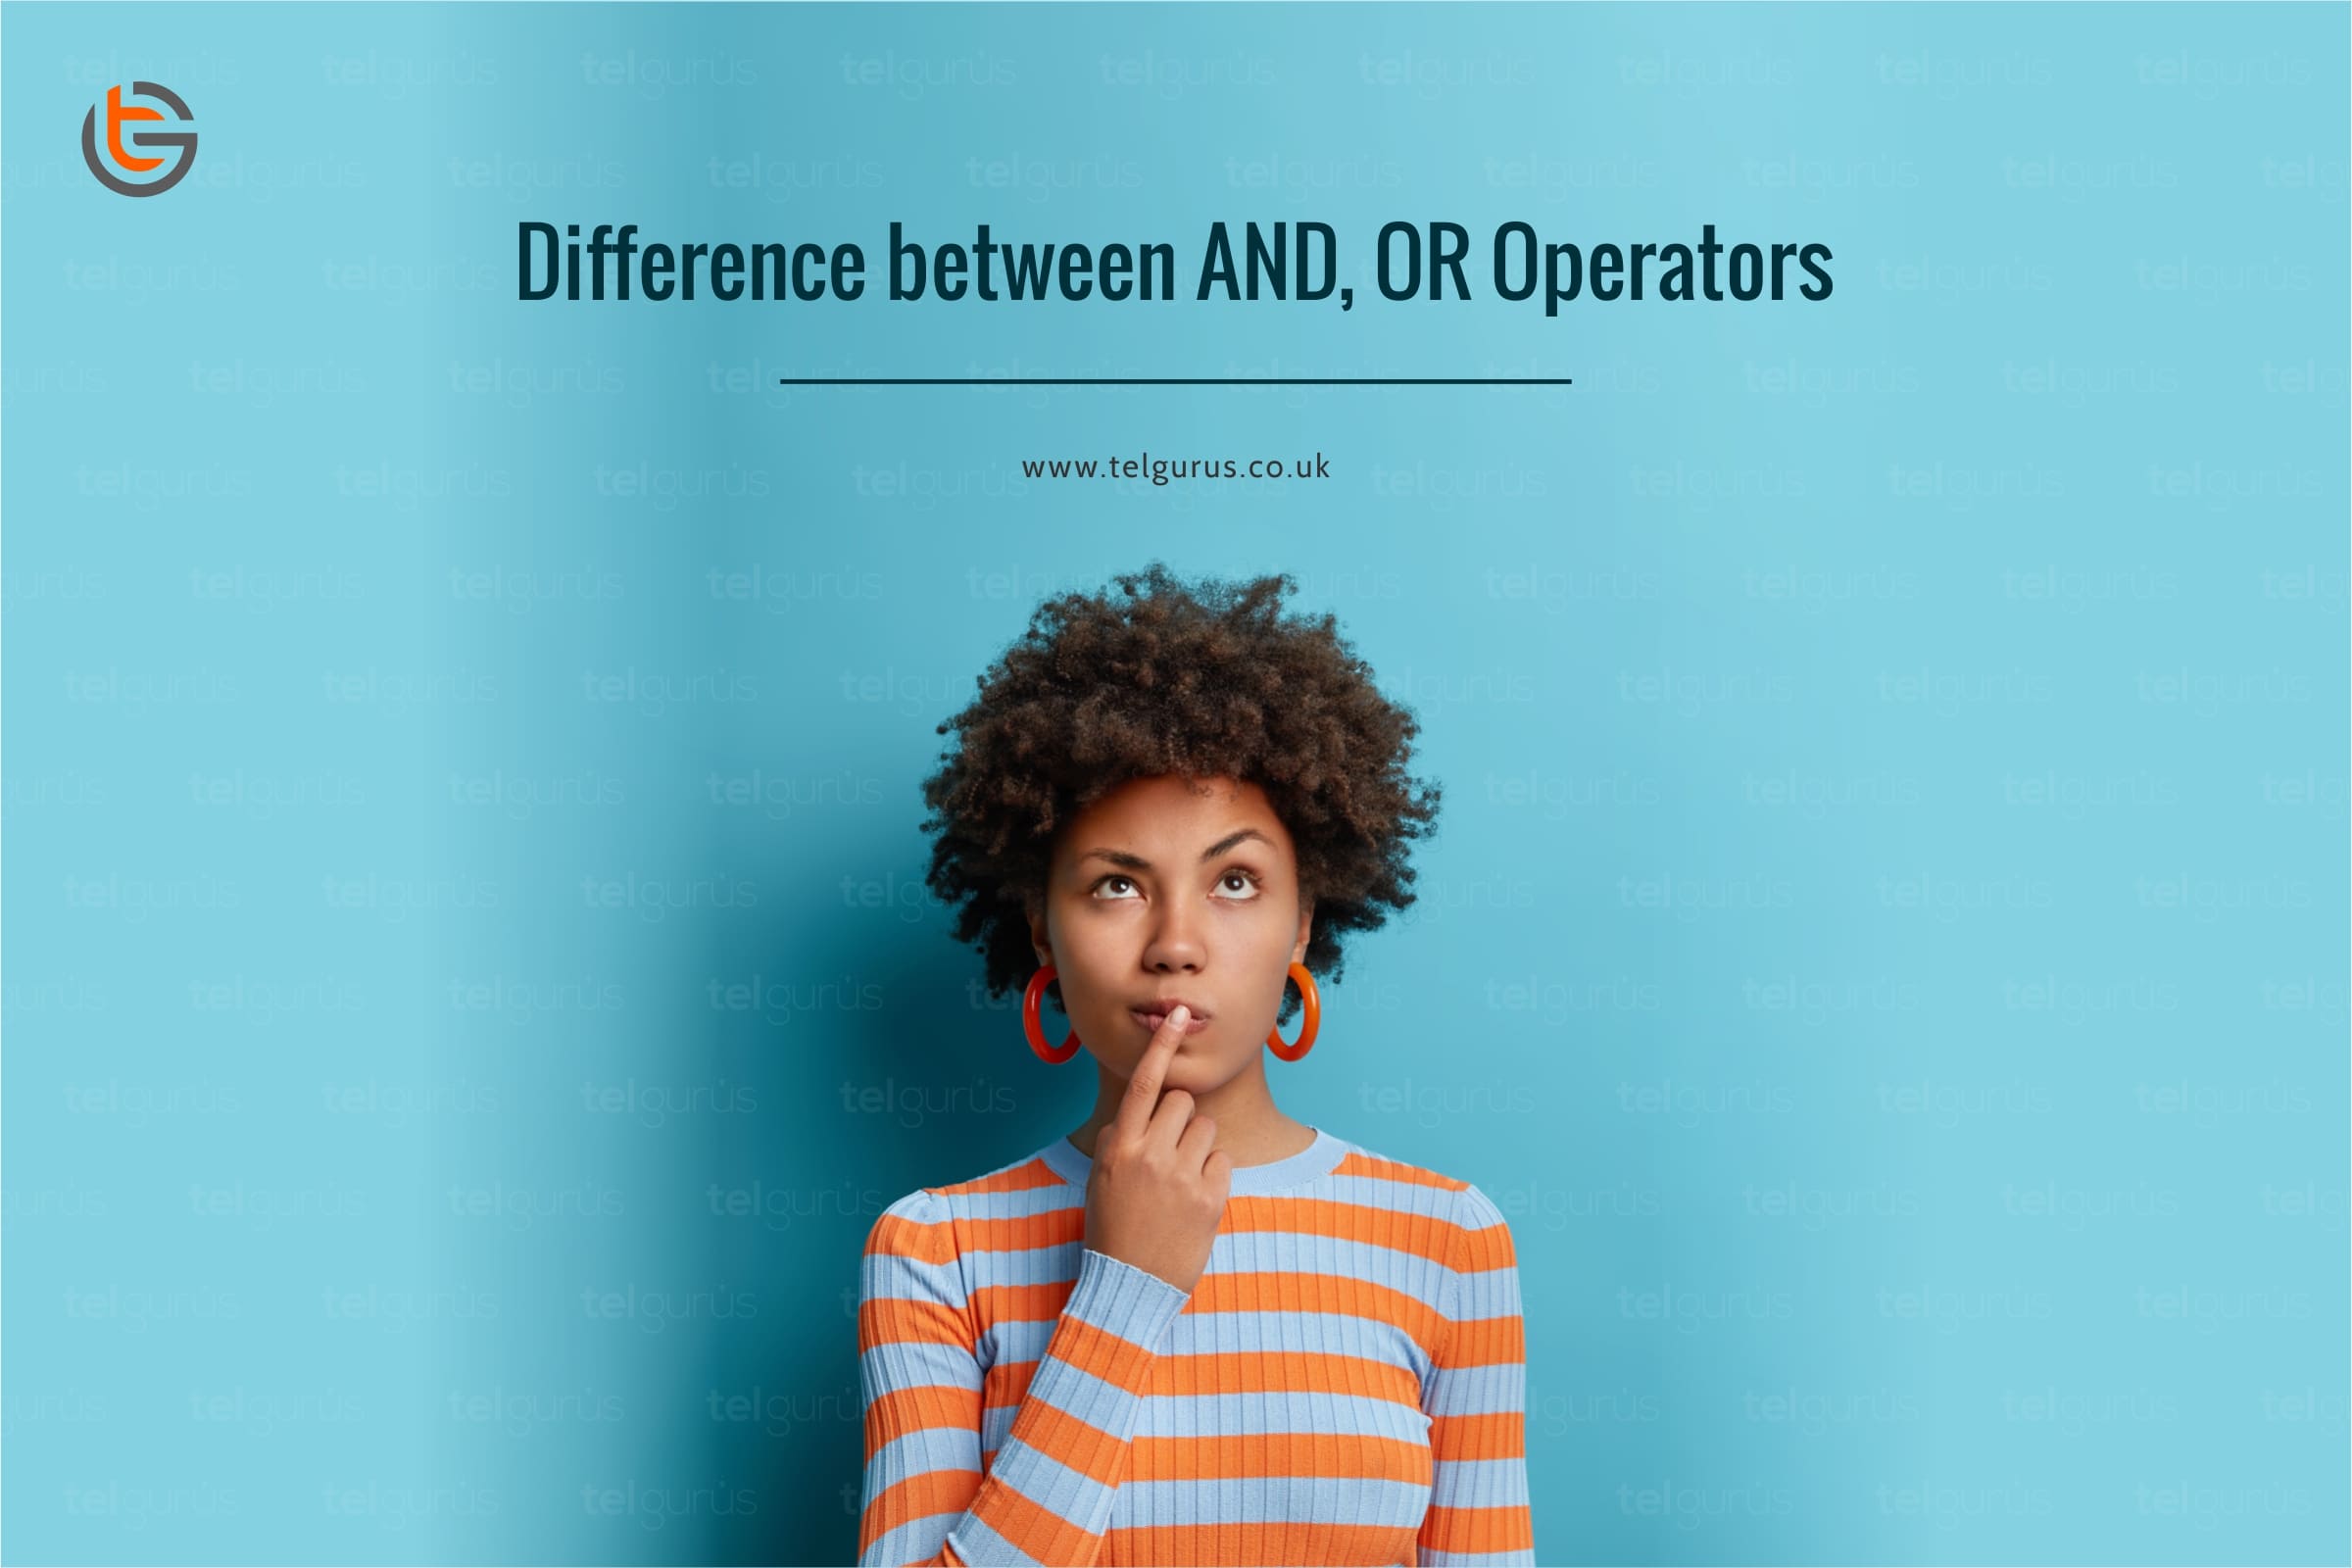 Difference between AND, OR Operators